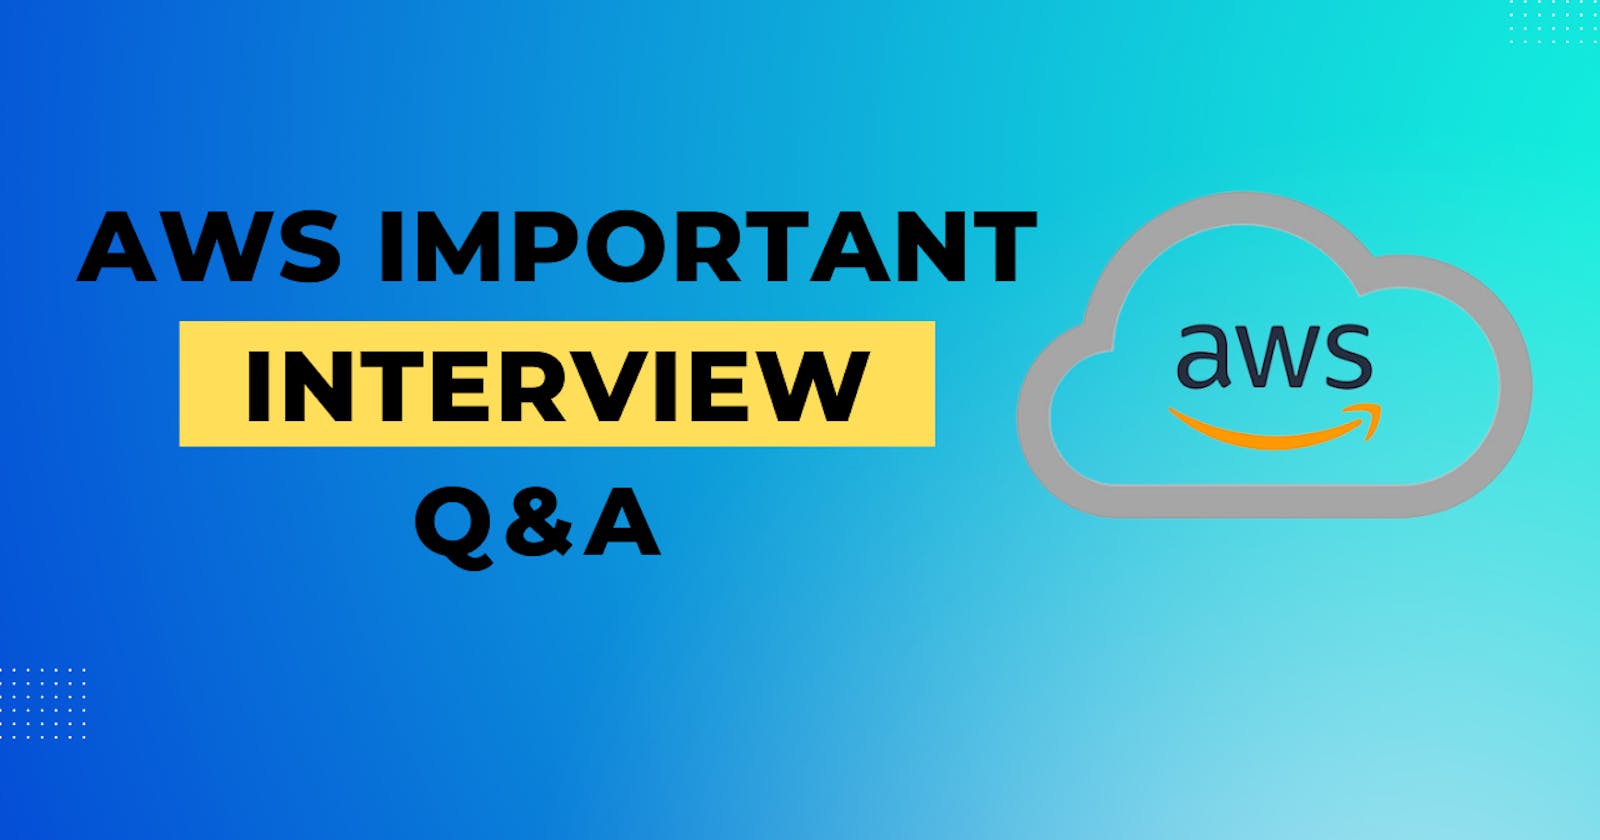 AWS Important Interview Q&A